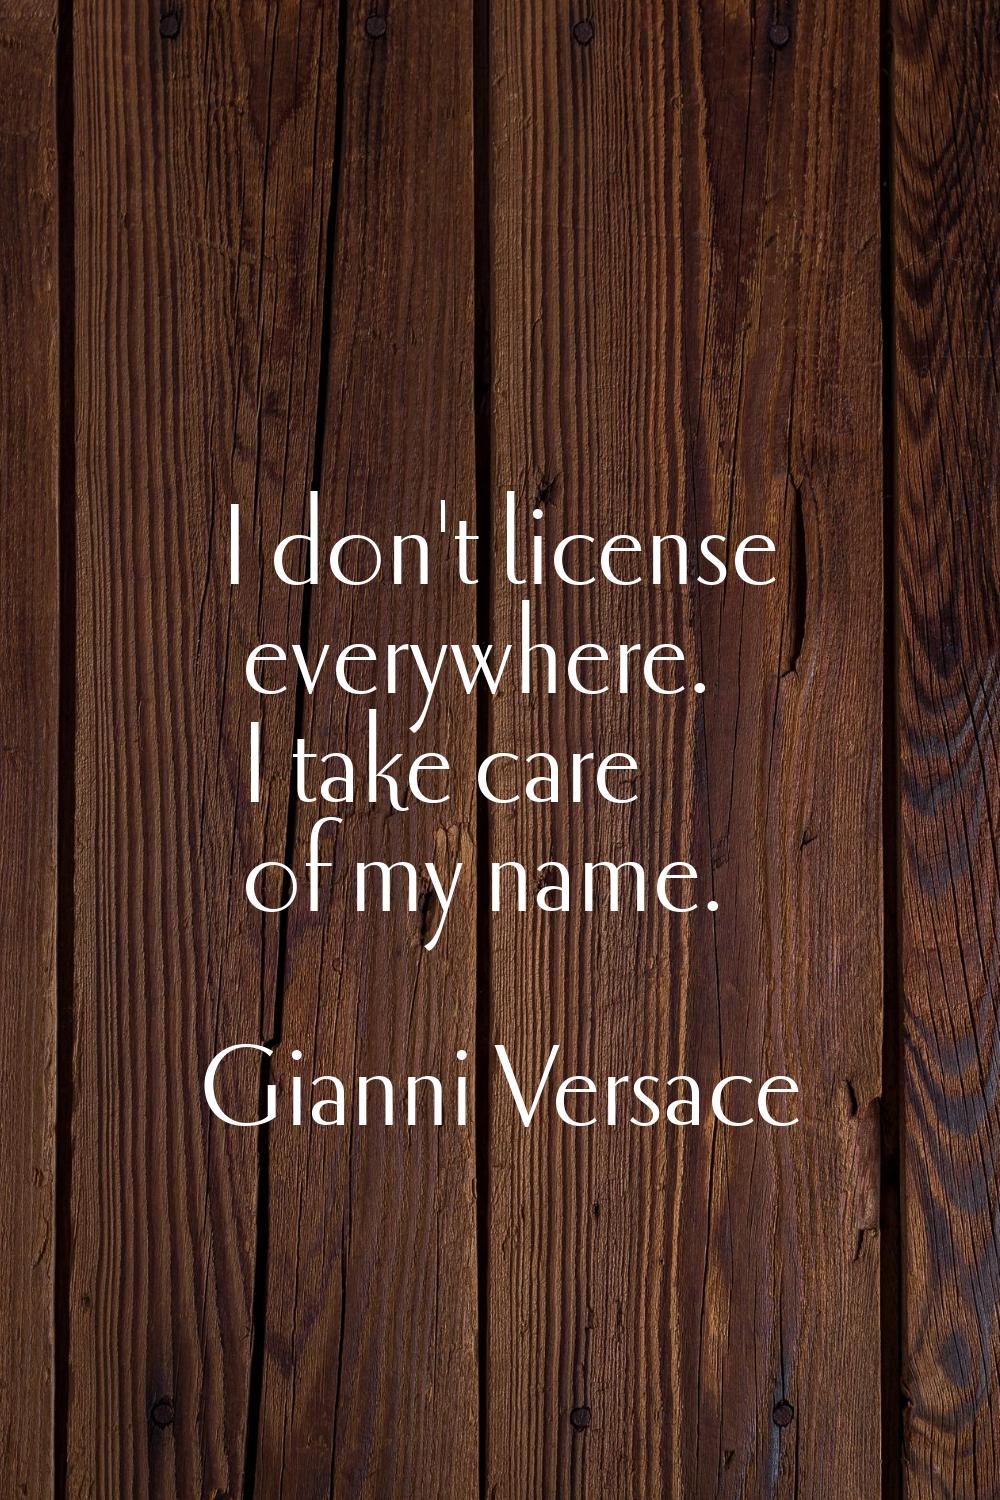 I don't license everywhere. I take care of my name.